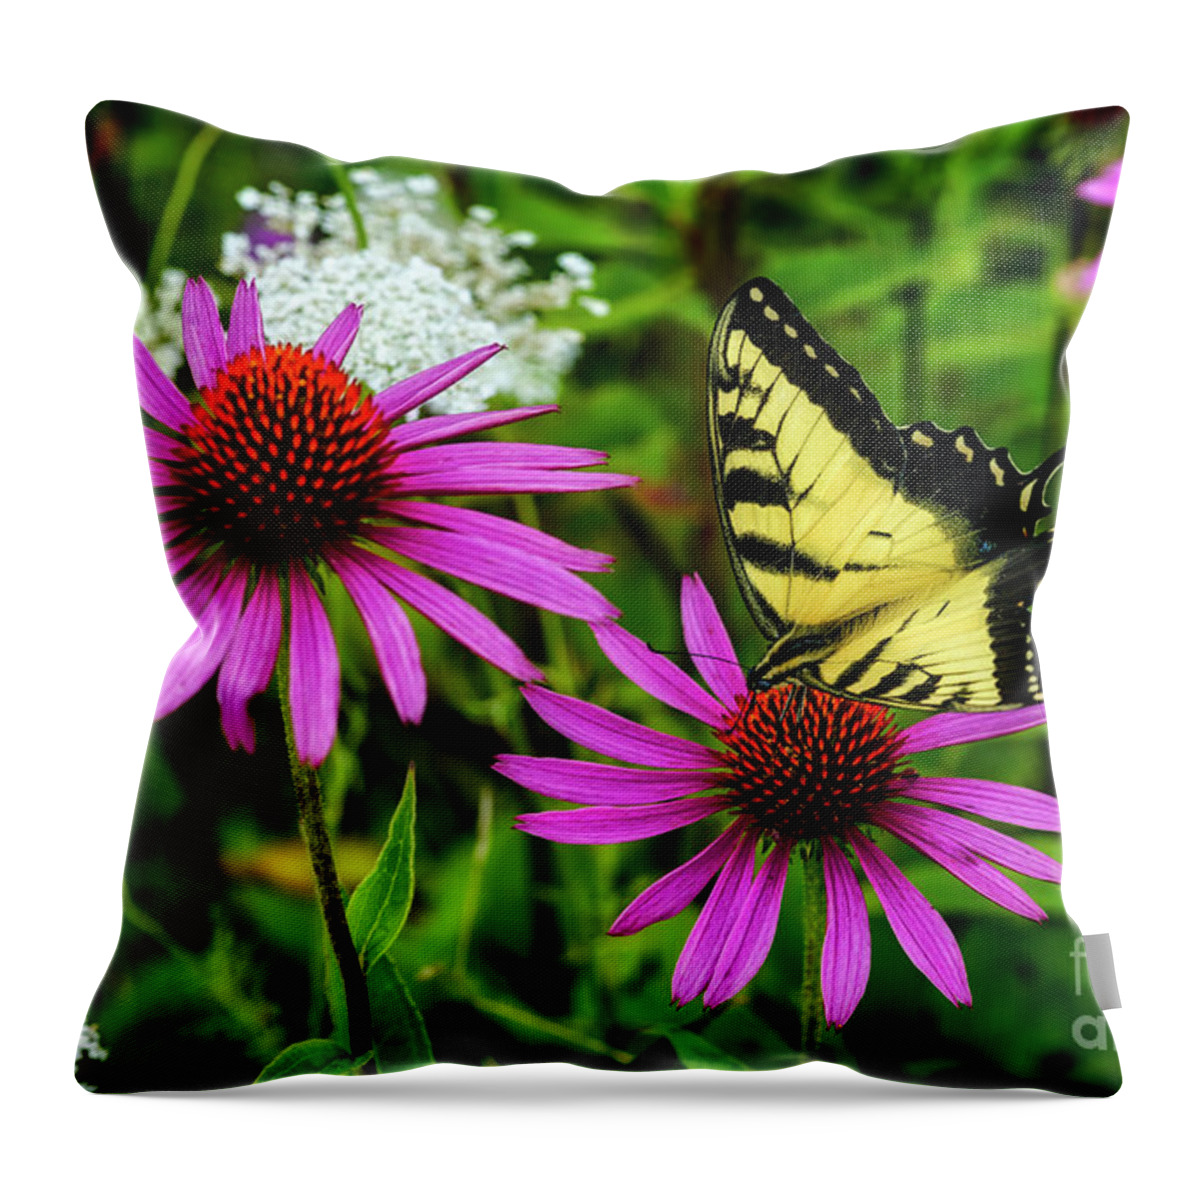 Purple Cone Flower Throw Pillow featuring the photograph Tiger Swallowtail Feeding on Echinacea by Thomas R Fletcher